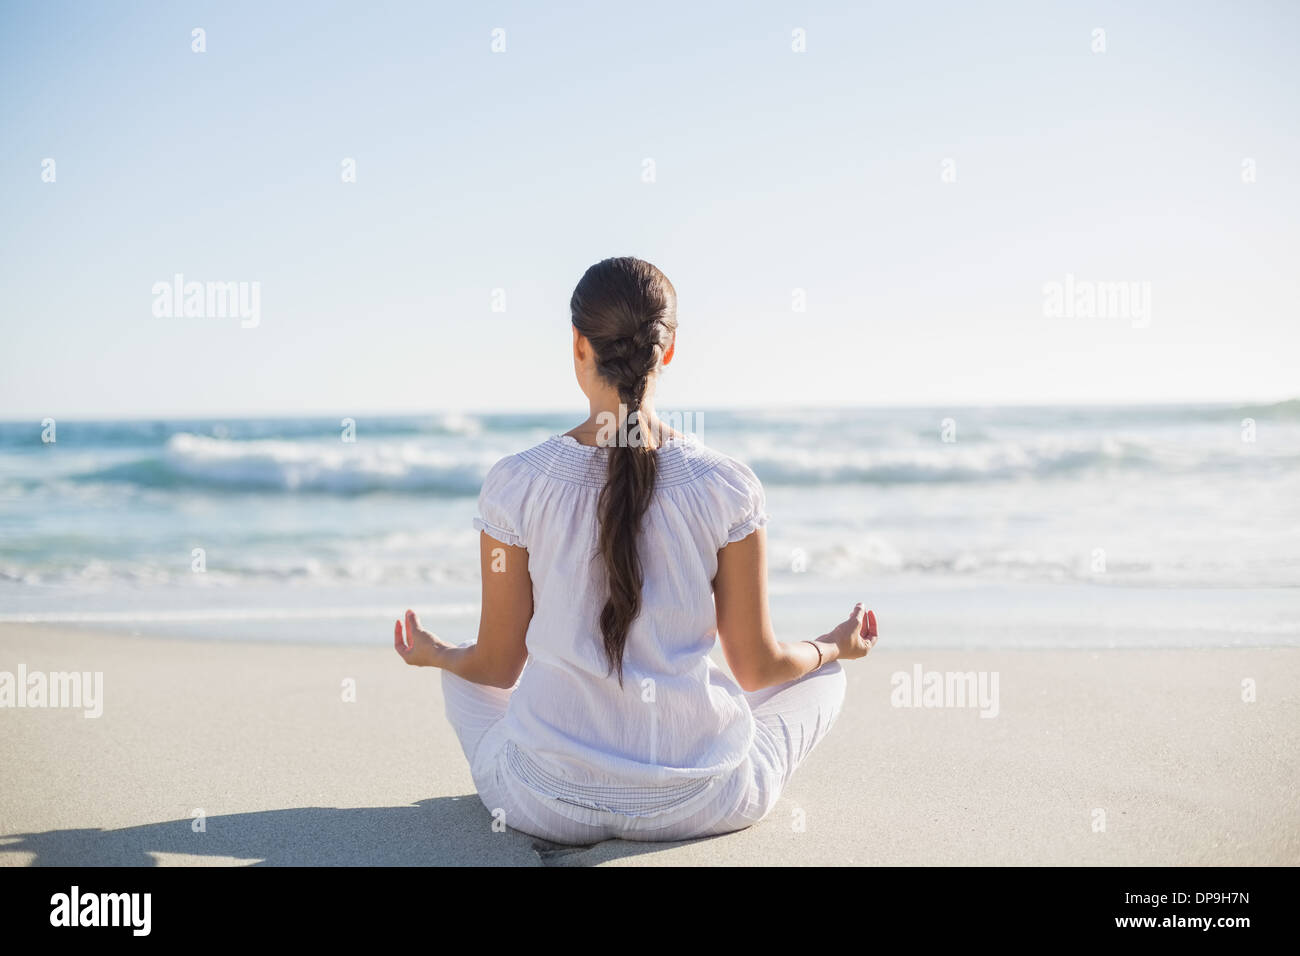 Rear view of pretty woman sitting in lotus posture Stock Photo